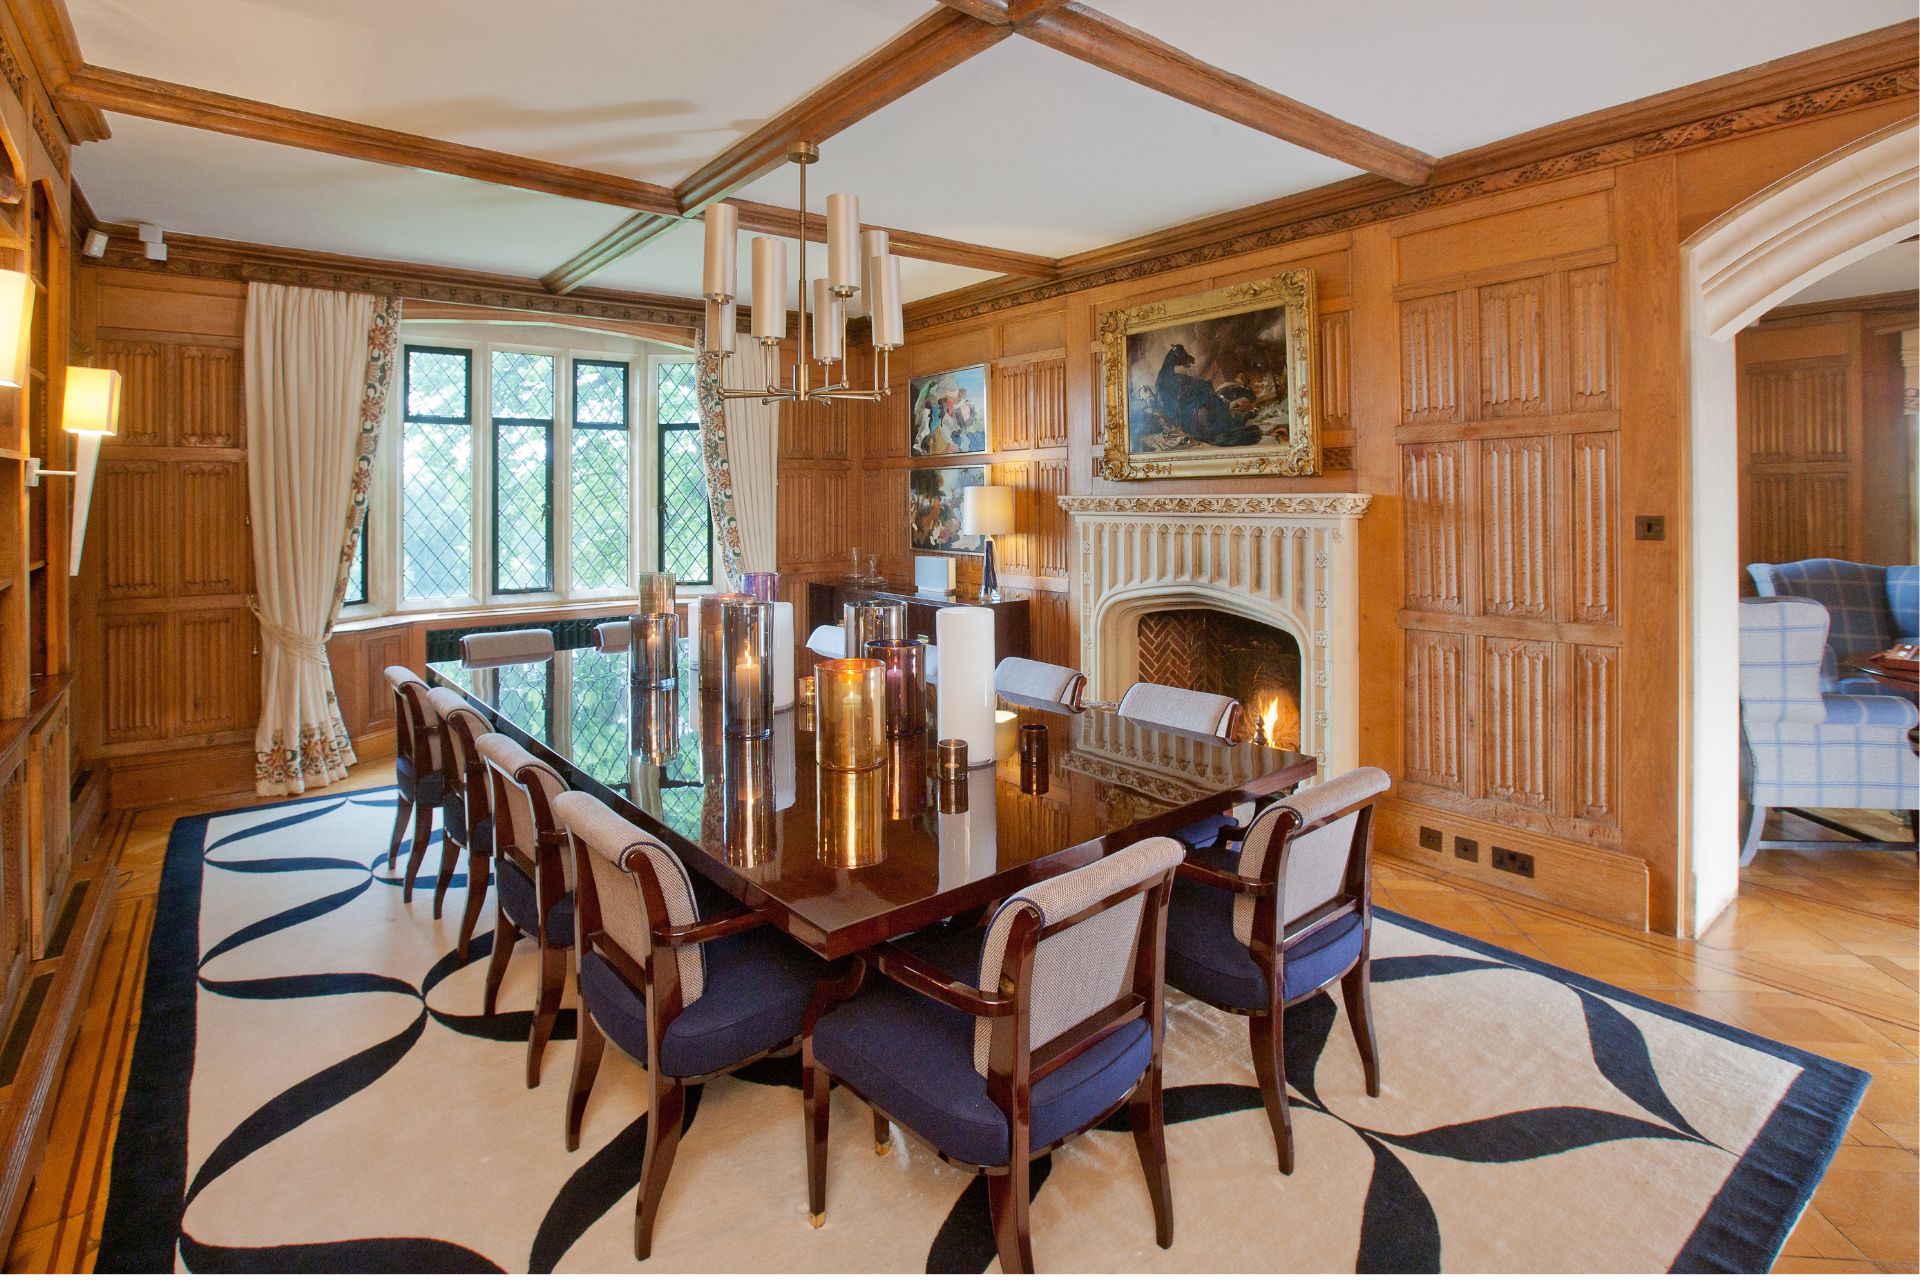 Wood panelled dining room with navy chairs and a cream and navy patterned rug.